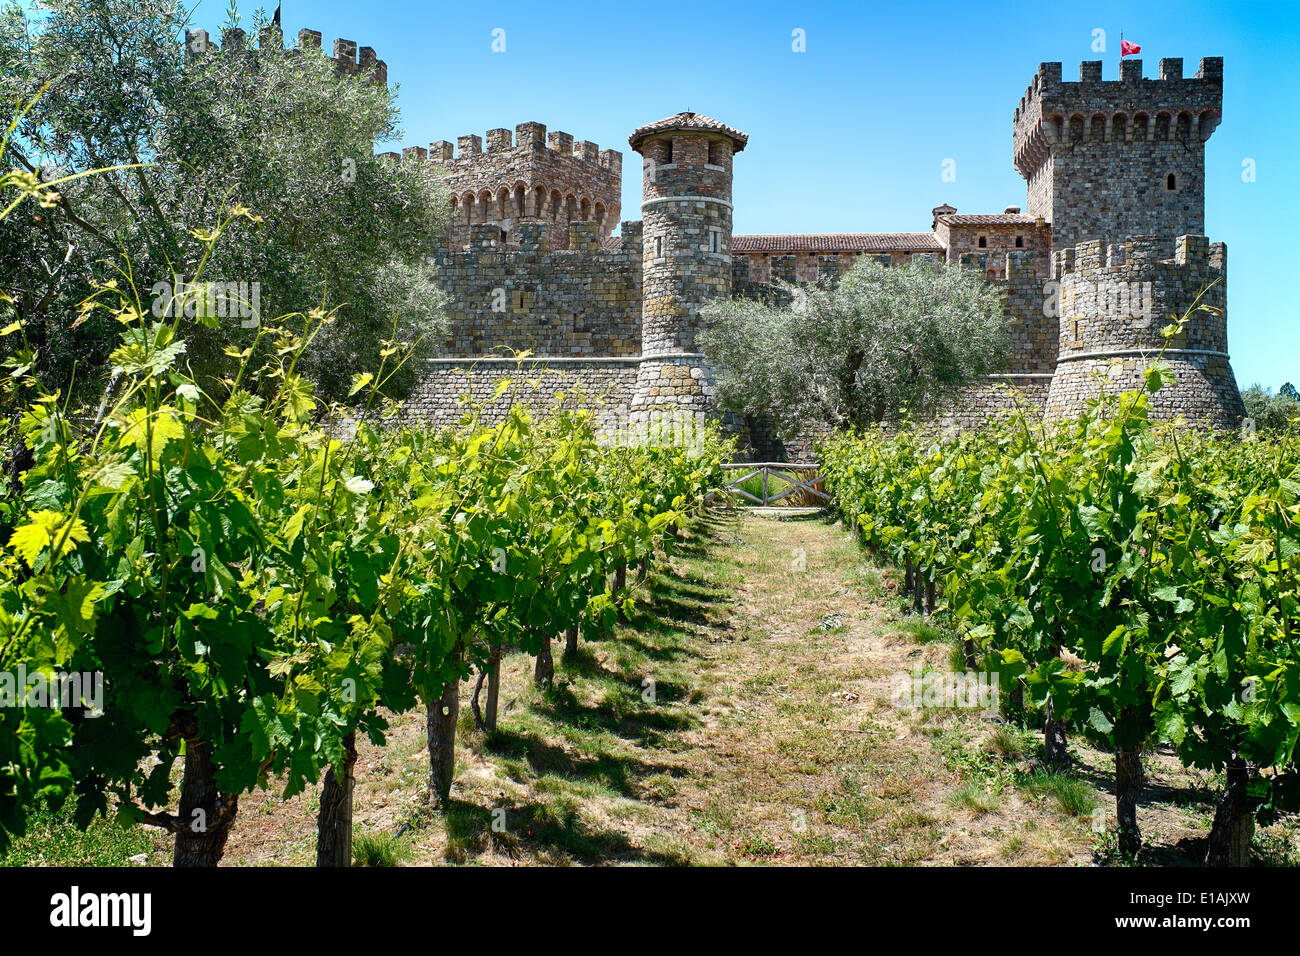 Low Angle View of a Tuscan Style Castle with rows of Grapevine; Castello Di Amorosa Winery, Calistoga, California Stock Photo